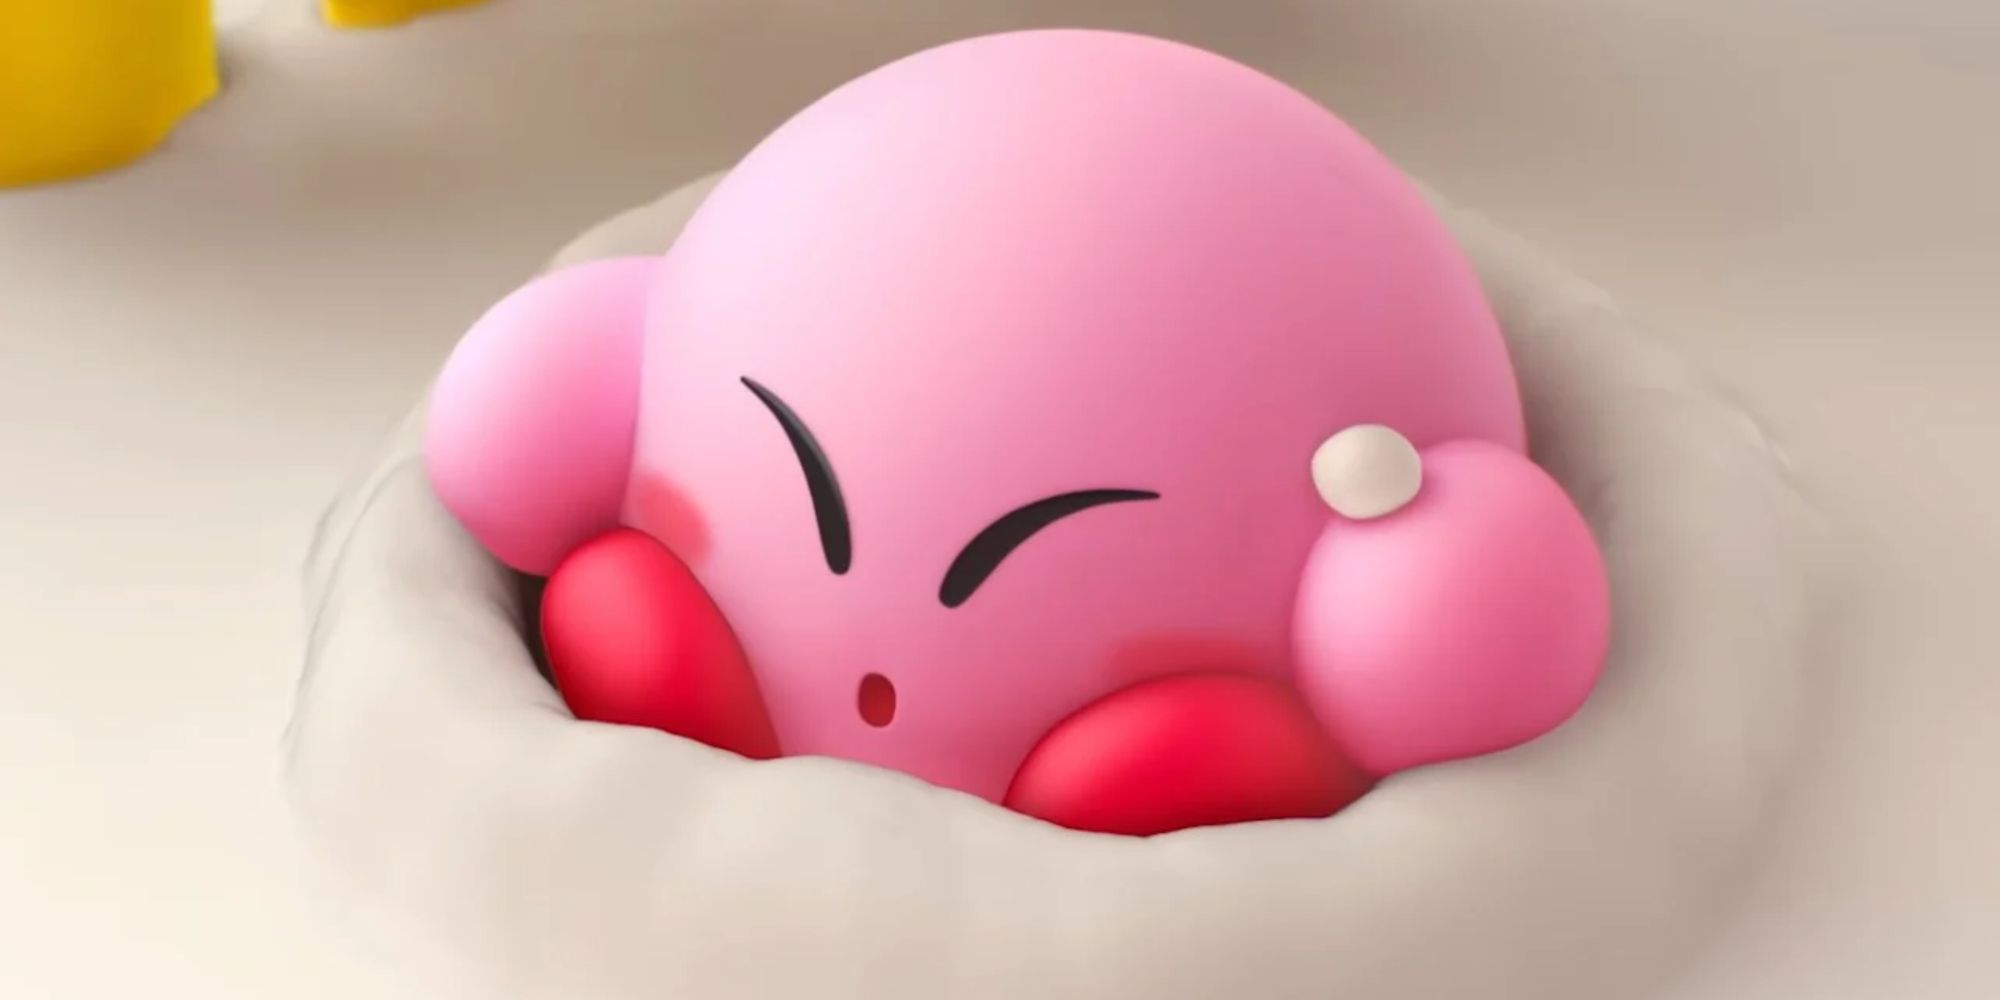 Kirby was sitting in the icing on the cake